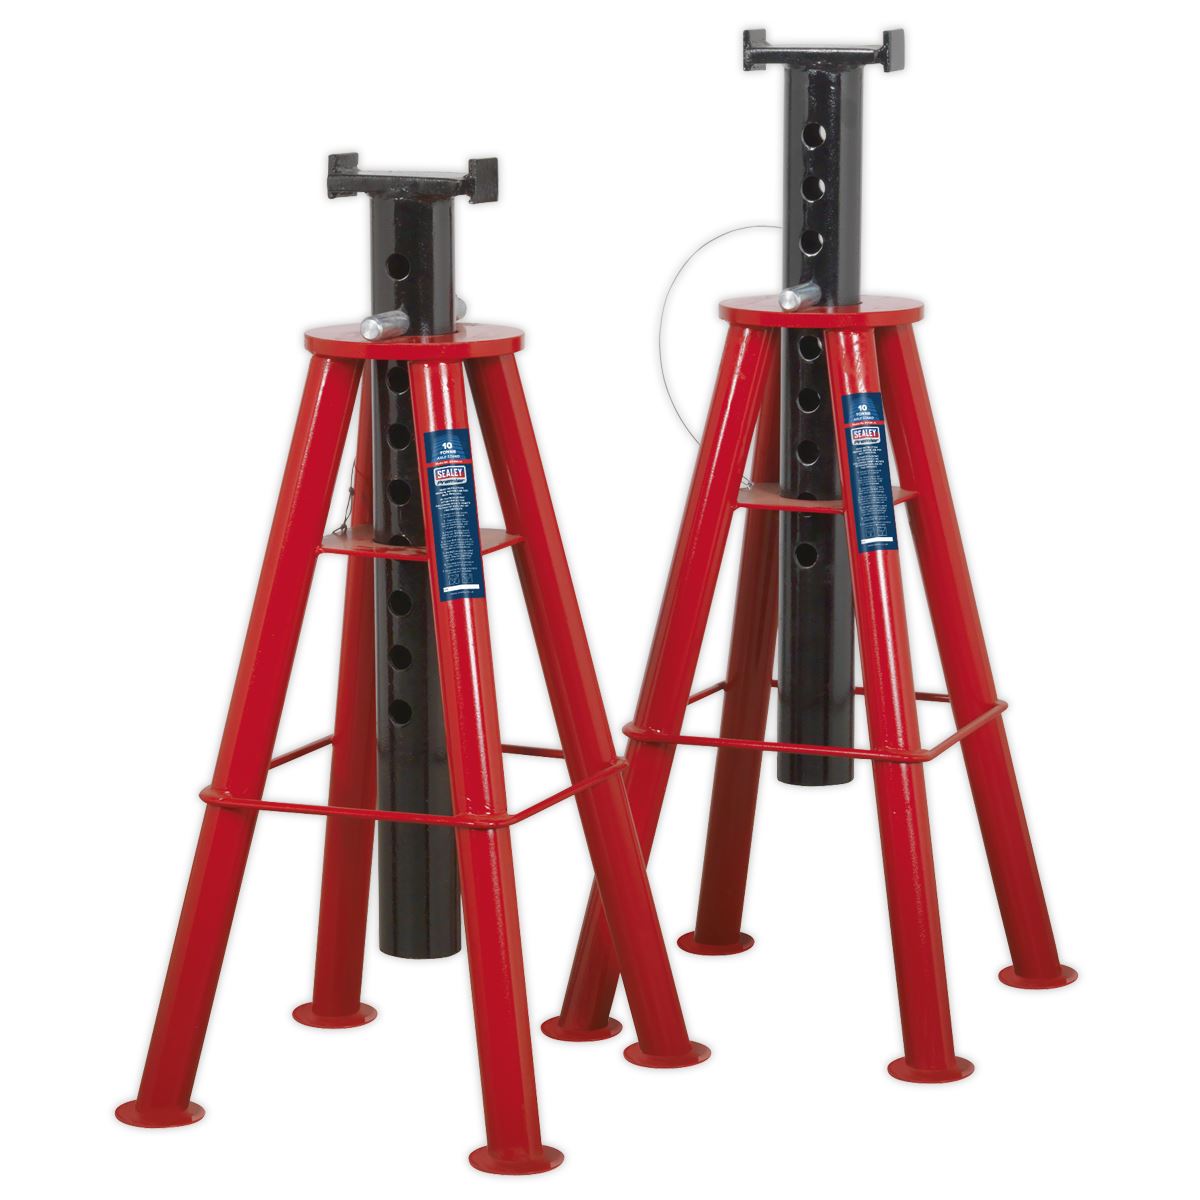 Sealey Premier Axle Stands (Pair) 10 Tonne Capacity per Stand High Level